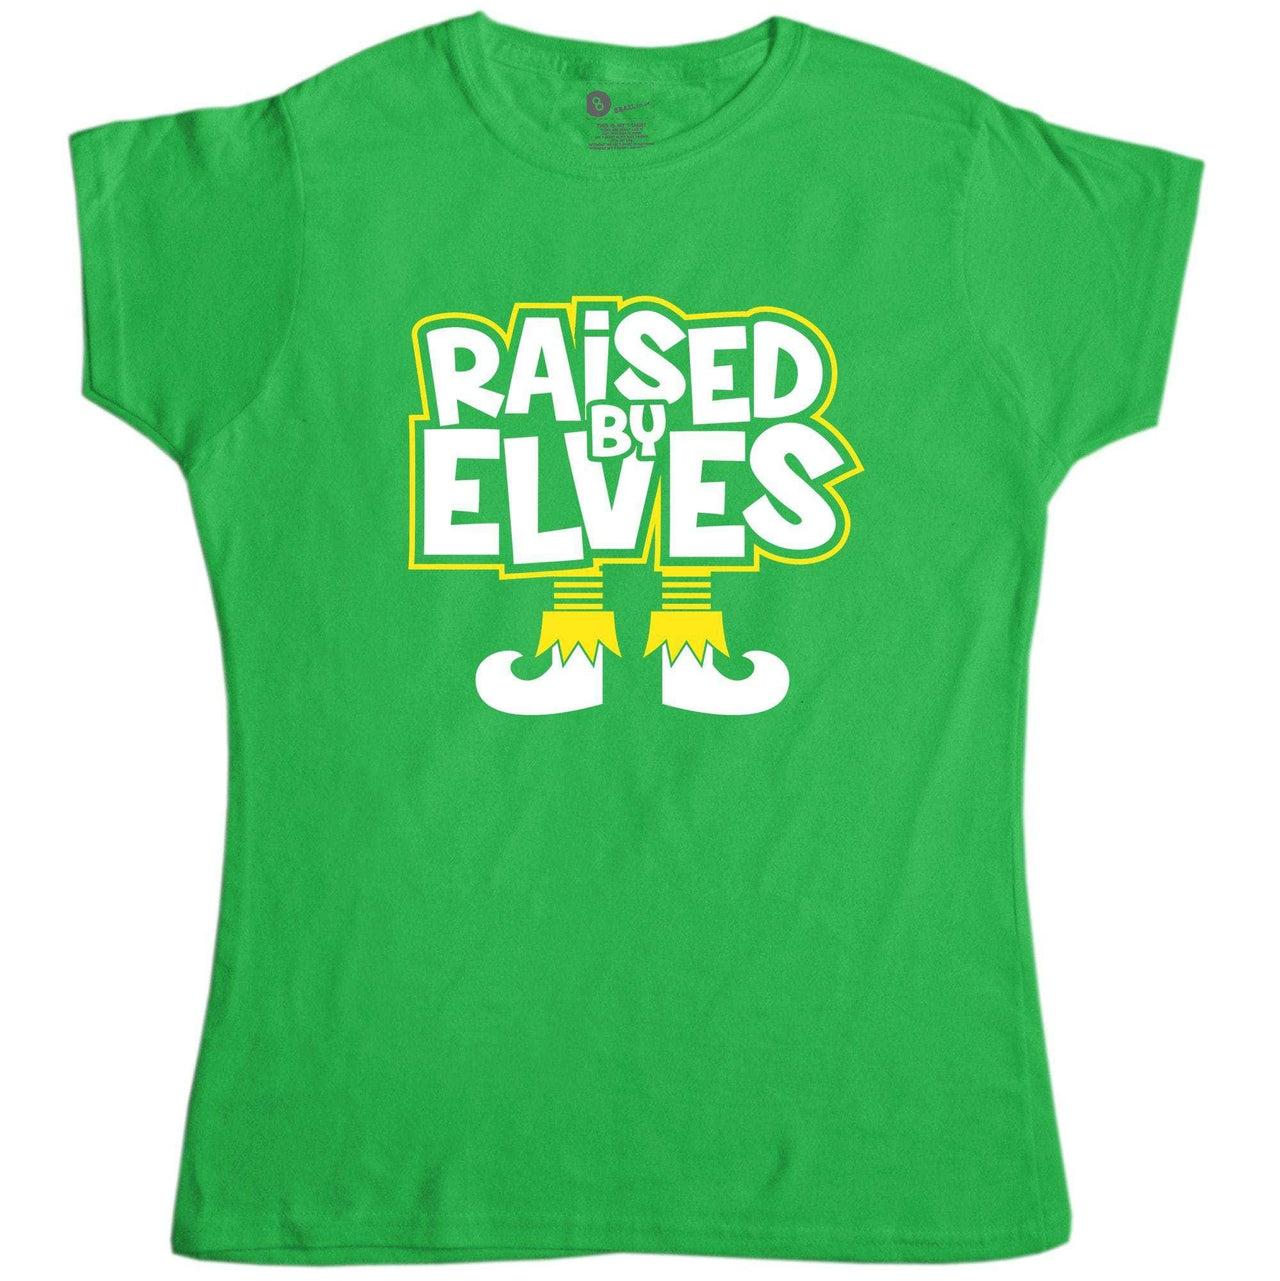 Raised By Elves Womens Fitted T-Shirt 8Ball